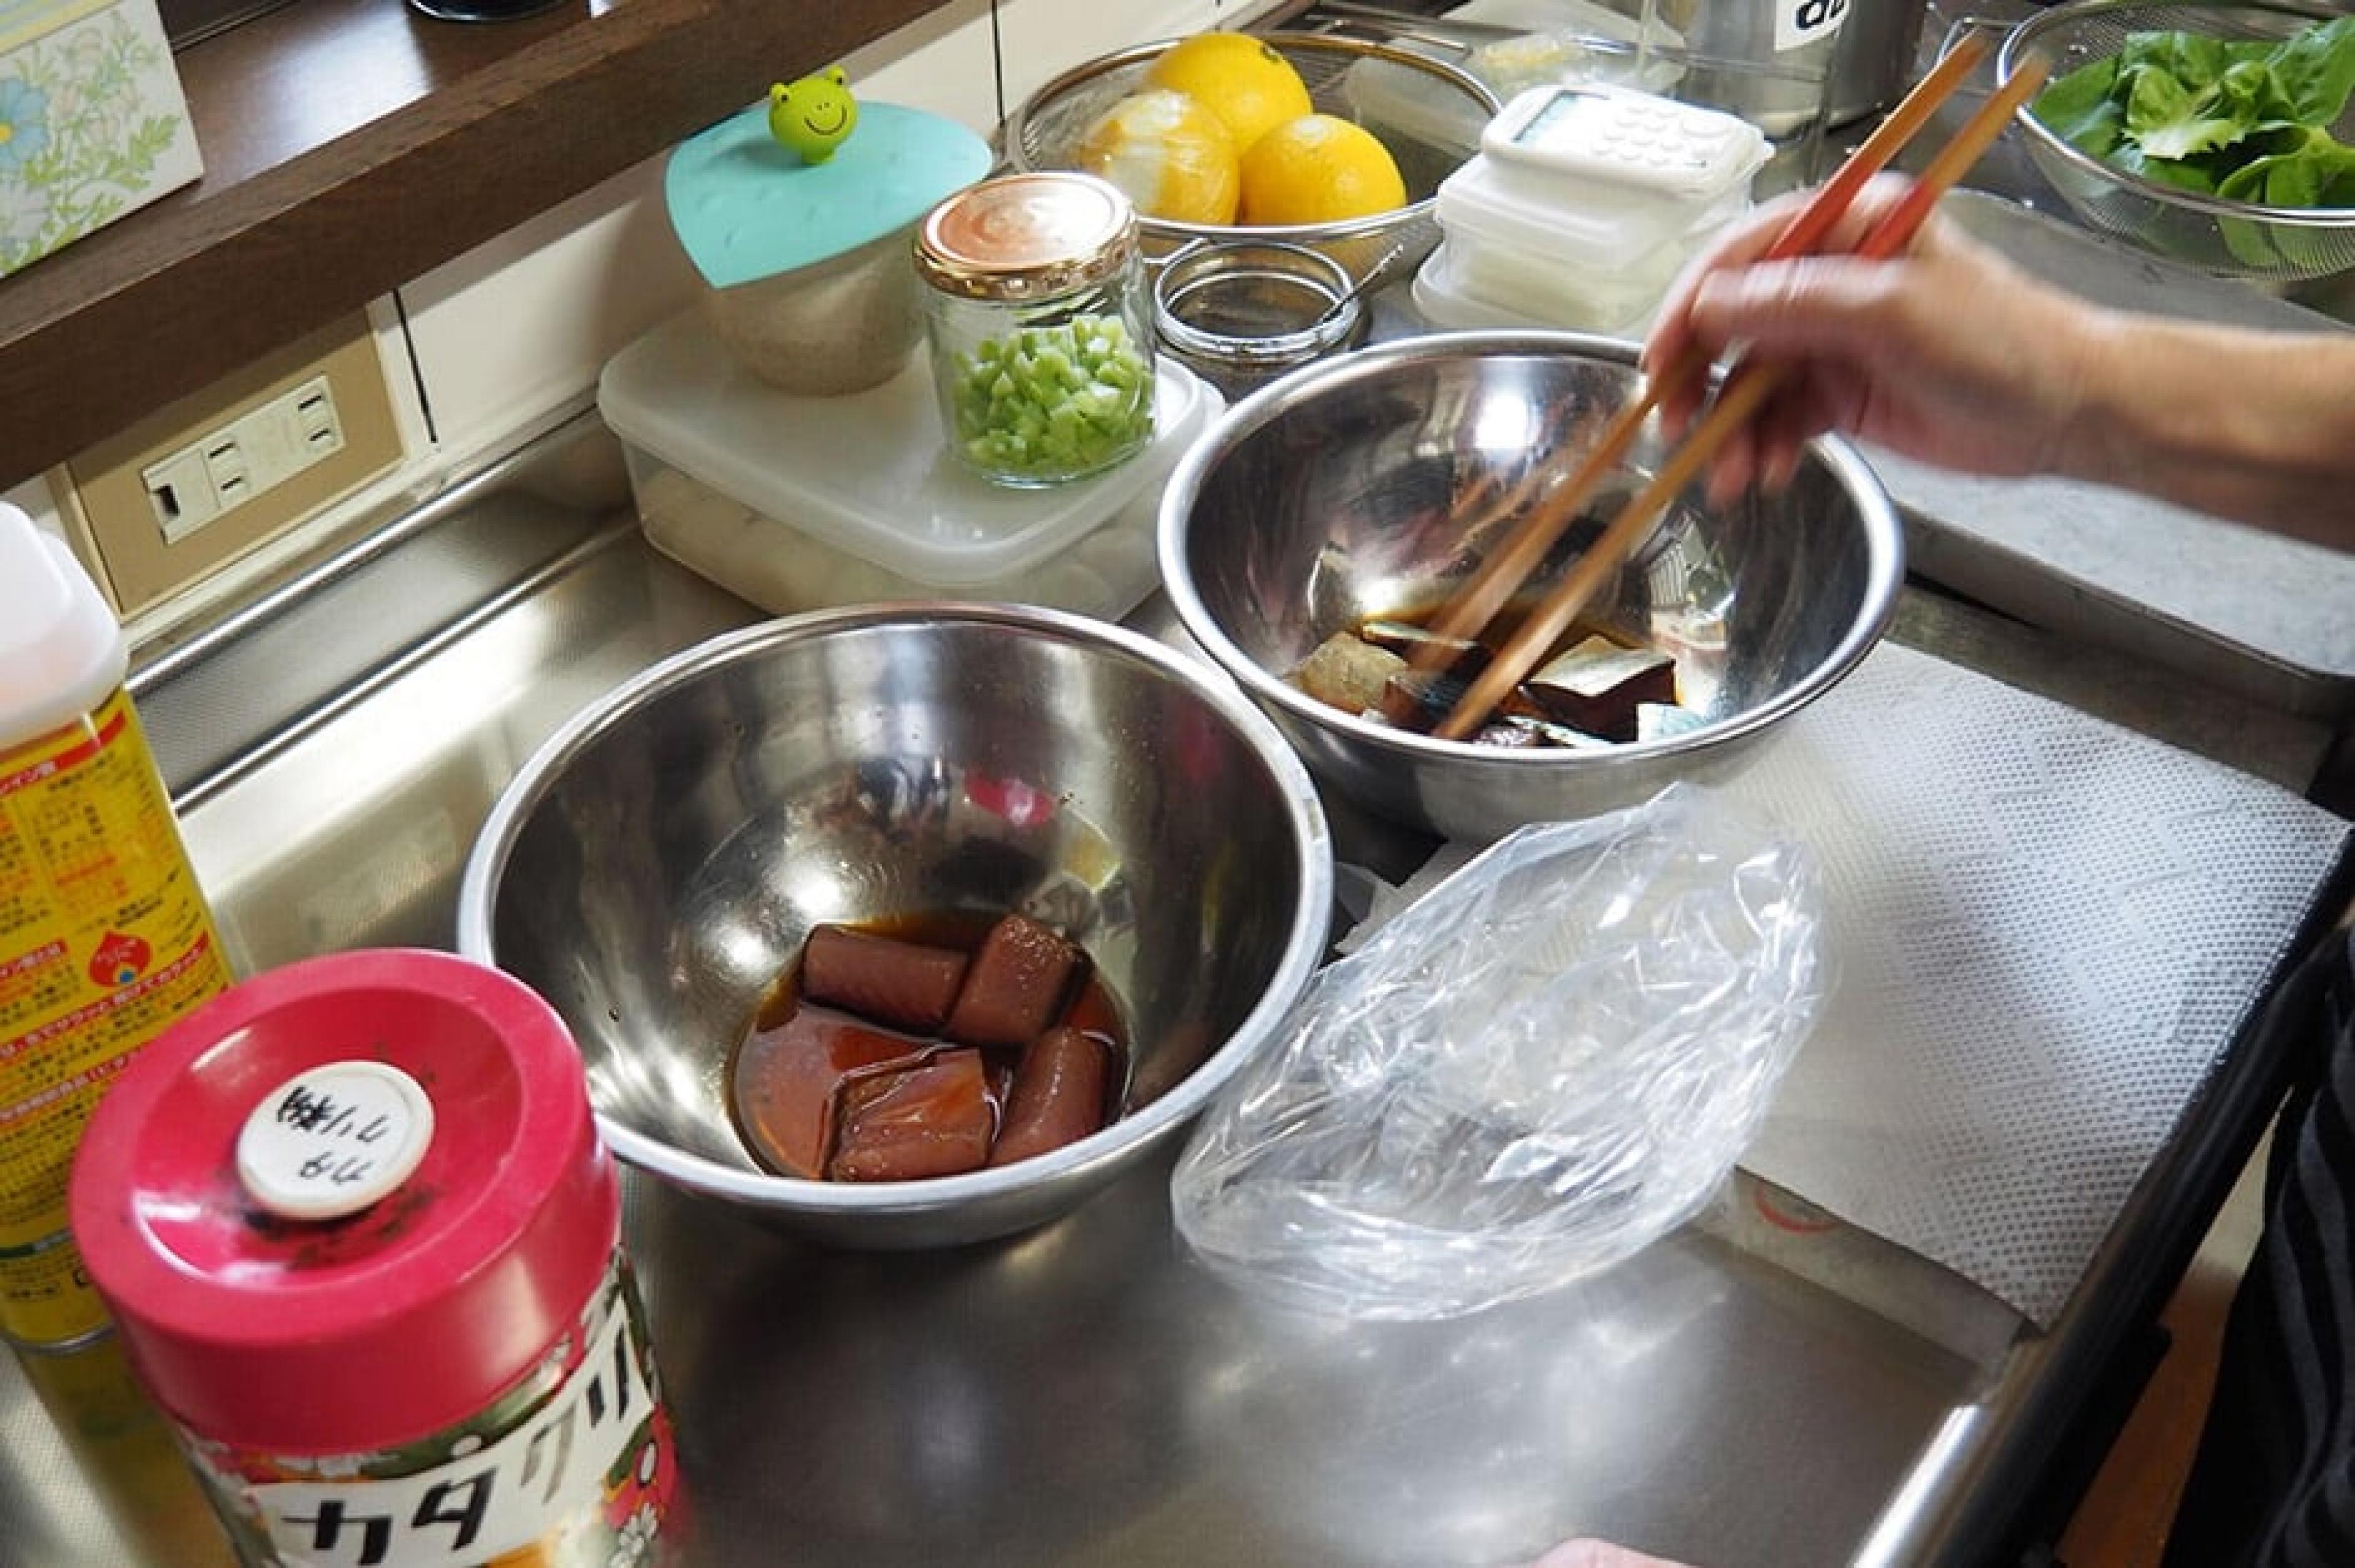 Food at Indagare Tours: In-Home Cooking Class, Kyoto, Japan